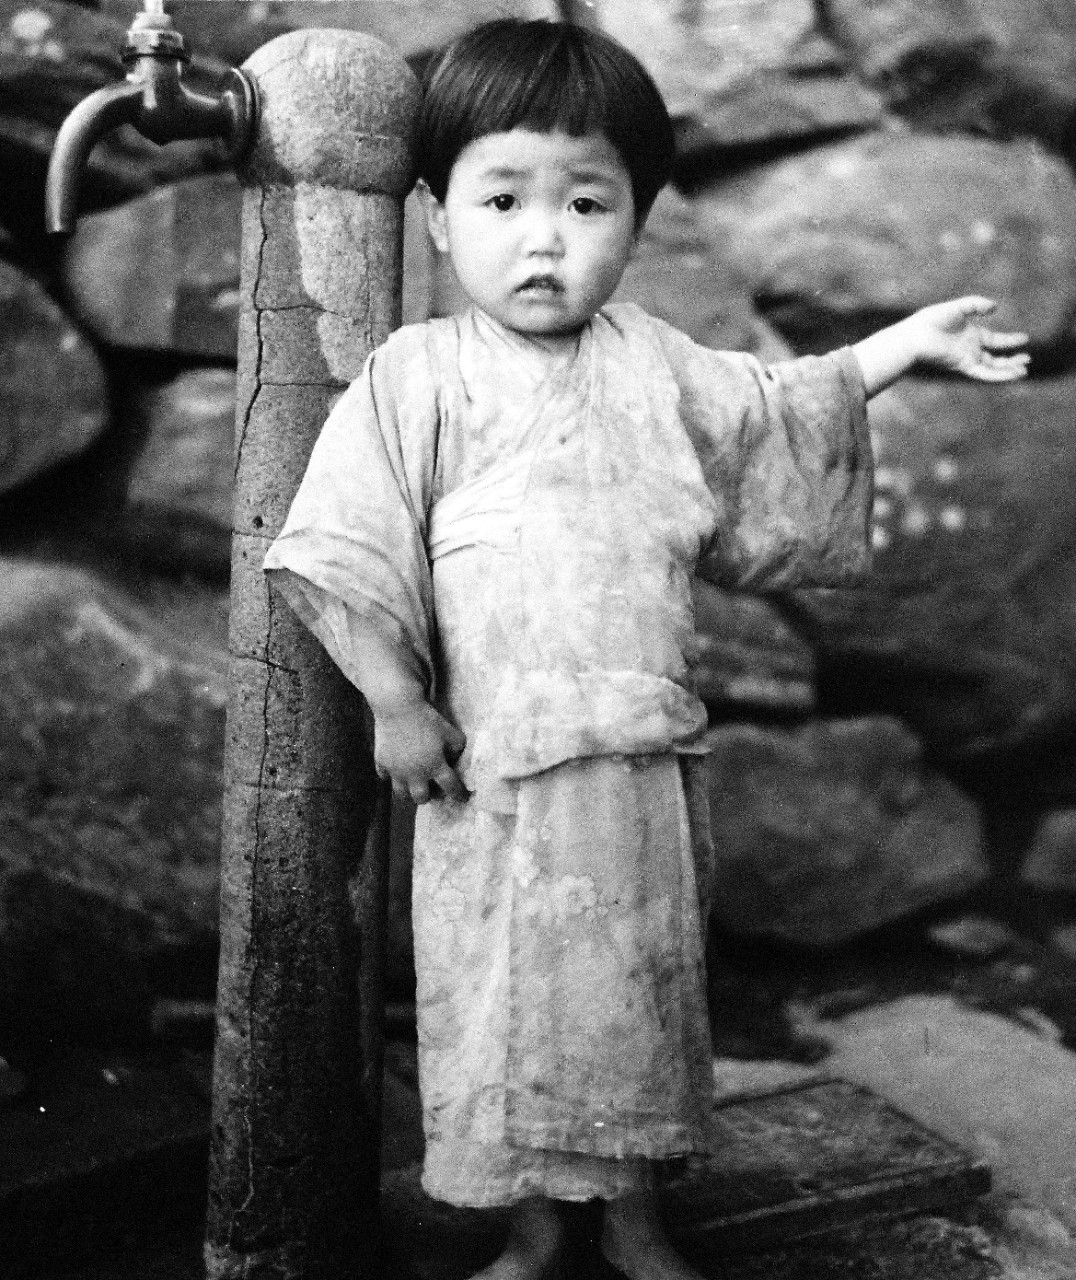 80-G-264847:   Occupation of Japan, 1945.    Scene at Sasebo, Kyushu, Japan, shows Japanese child.  Photographed by crewmember of USS Chenango (CVE-28), released October 19, 1945.   Official U.S. Navy photograph, now in the collection of the National Archives.  (2015/12/01).